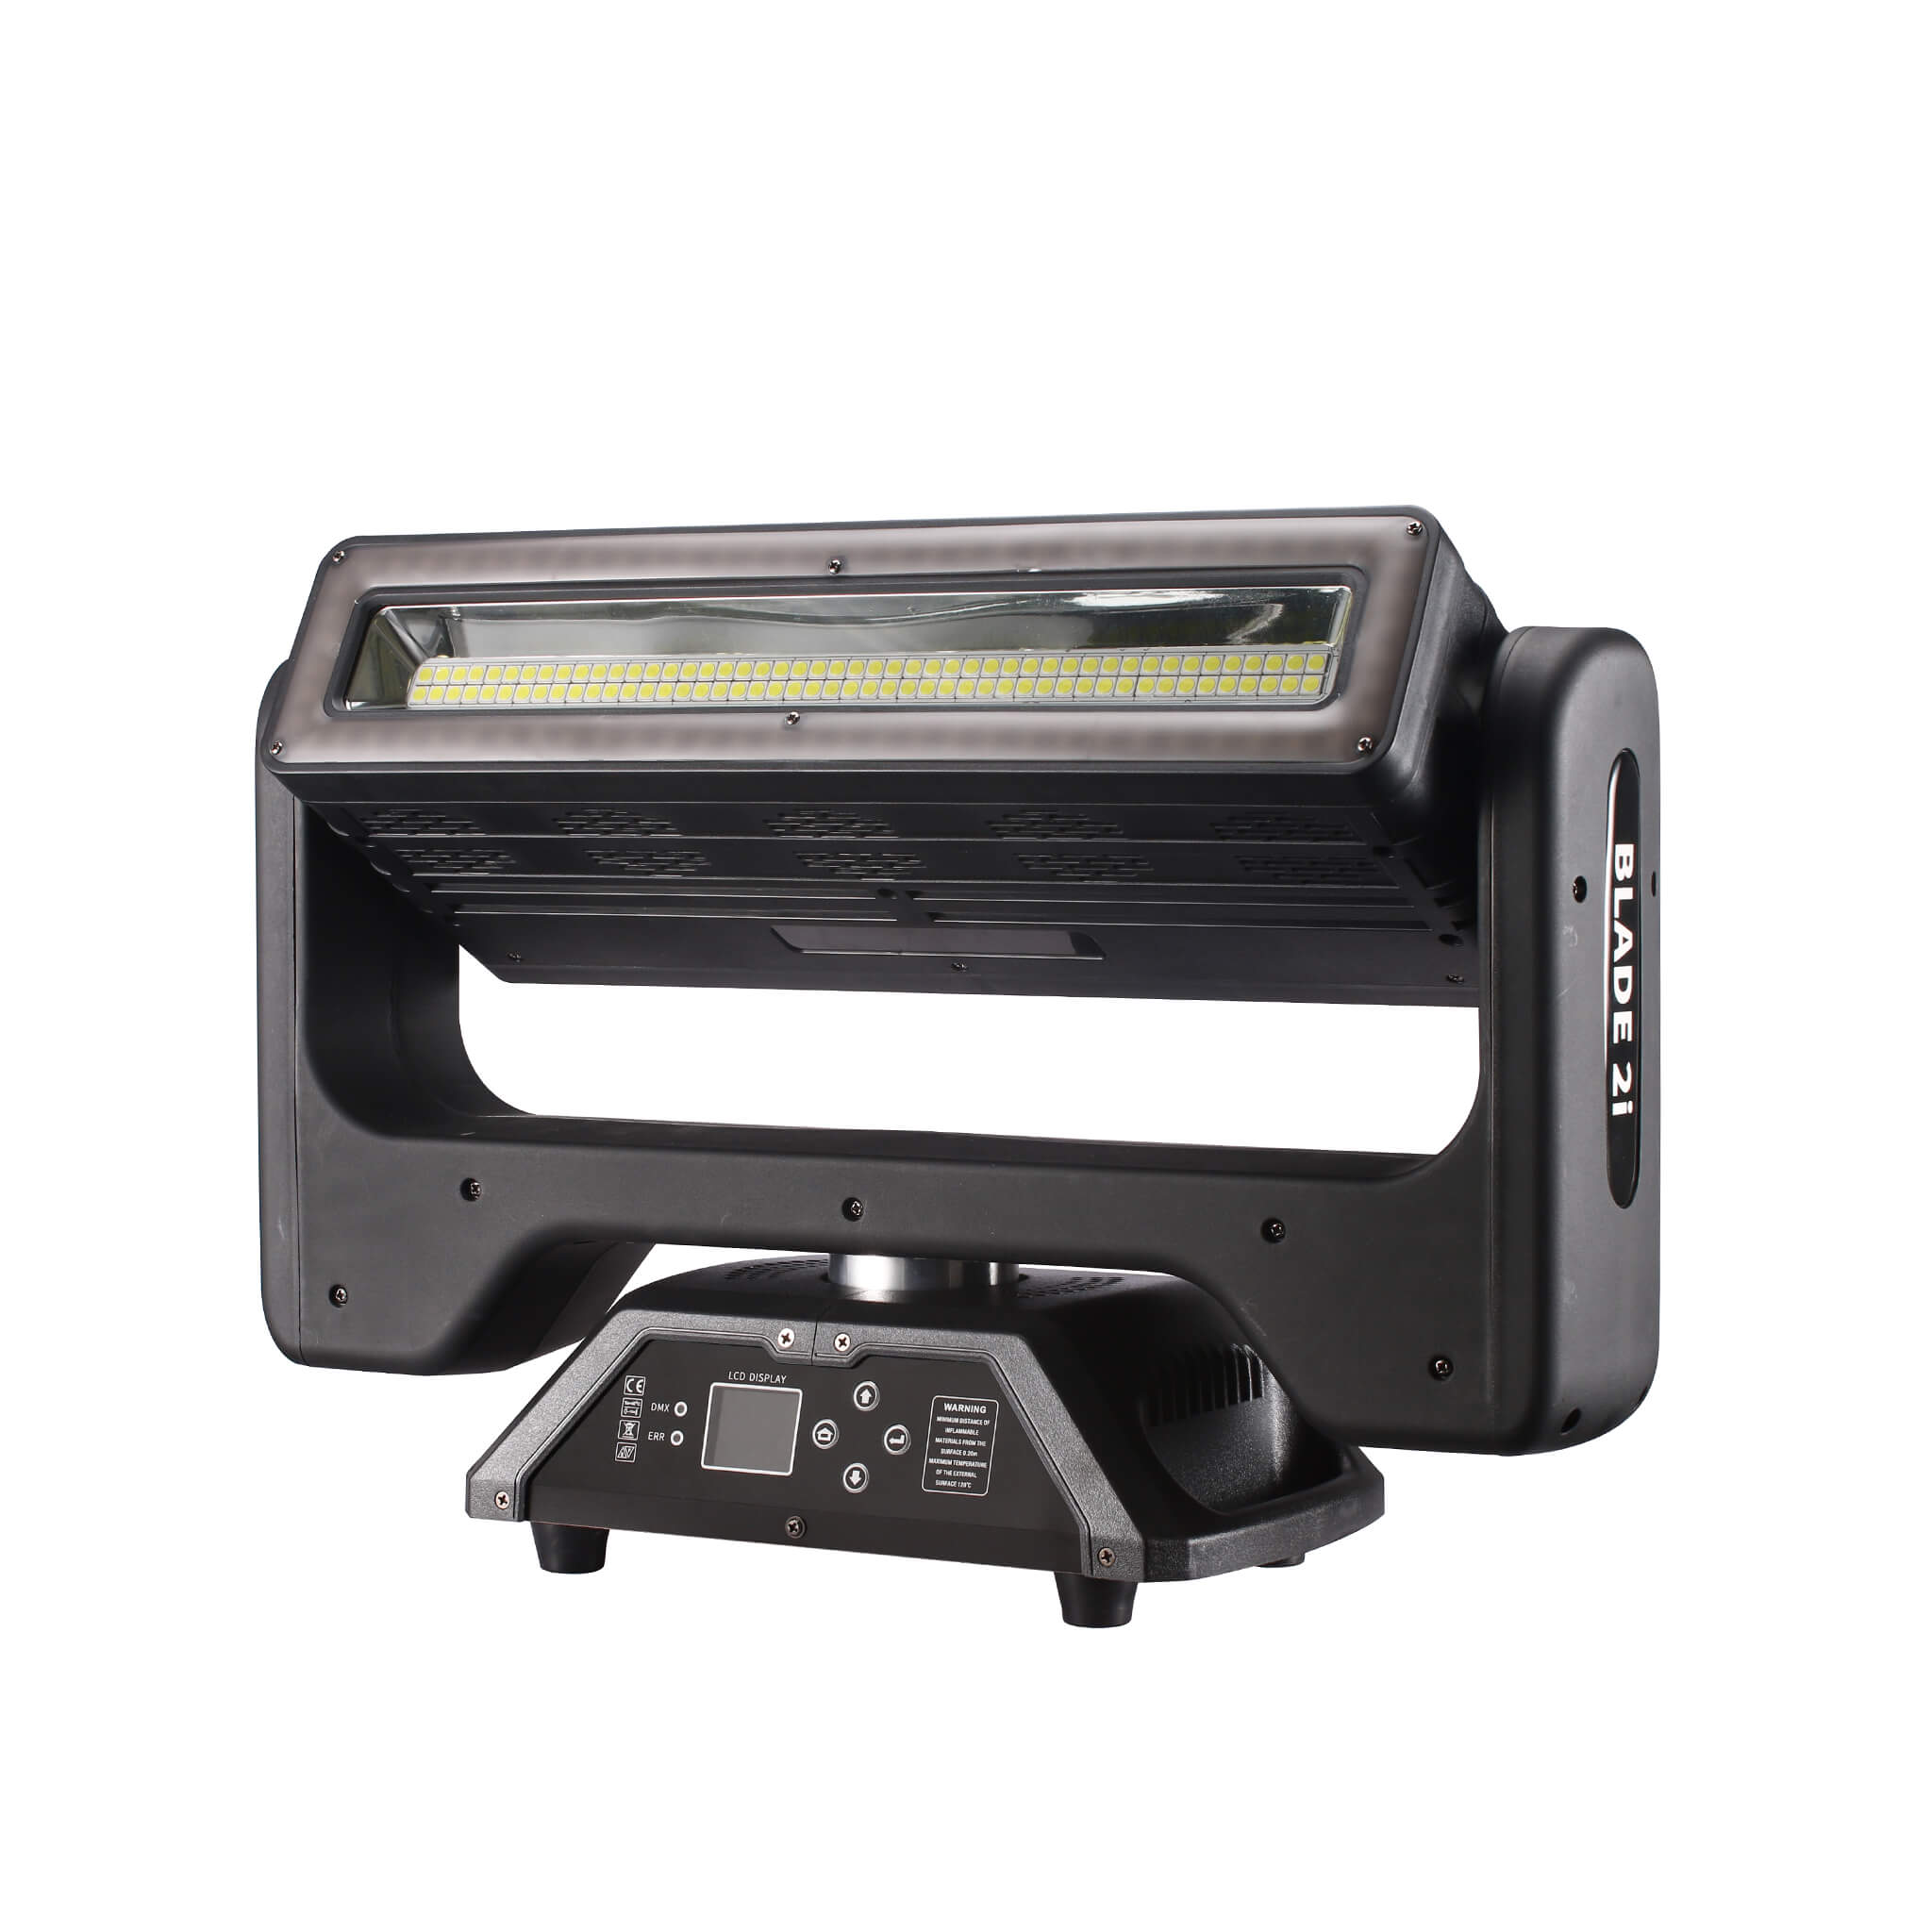 5 Pieces 500W Double-Sided Blade Strobe Beam Wash Light